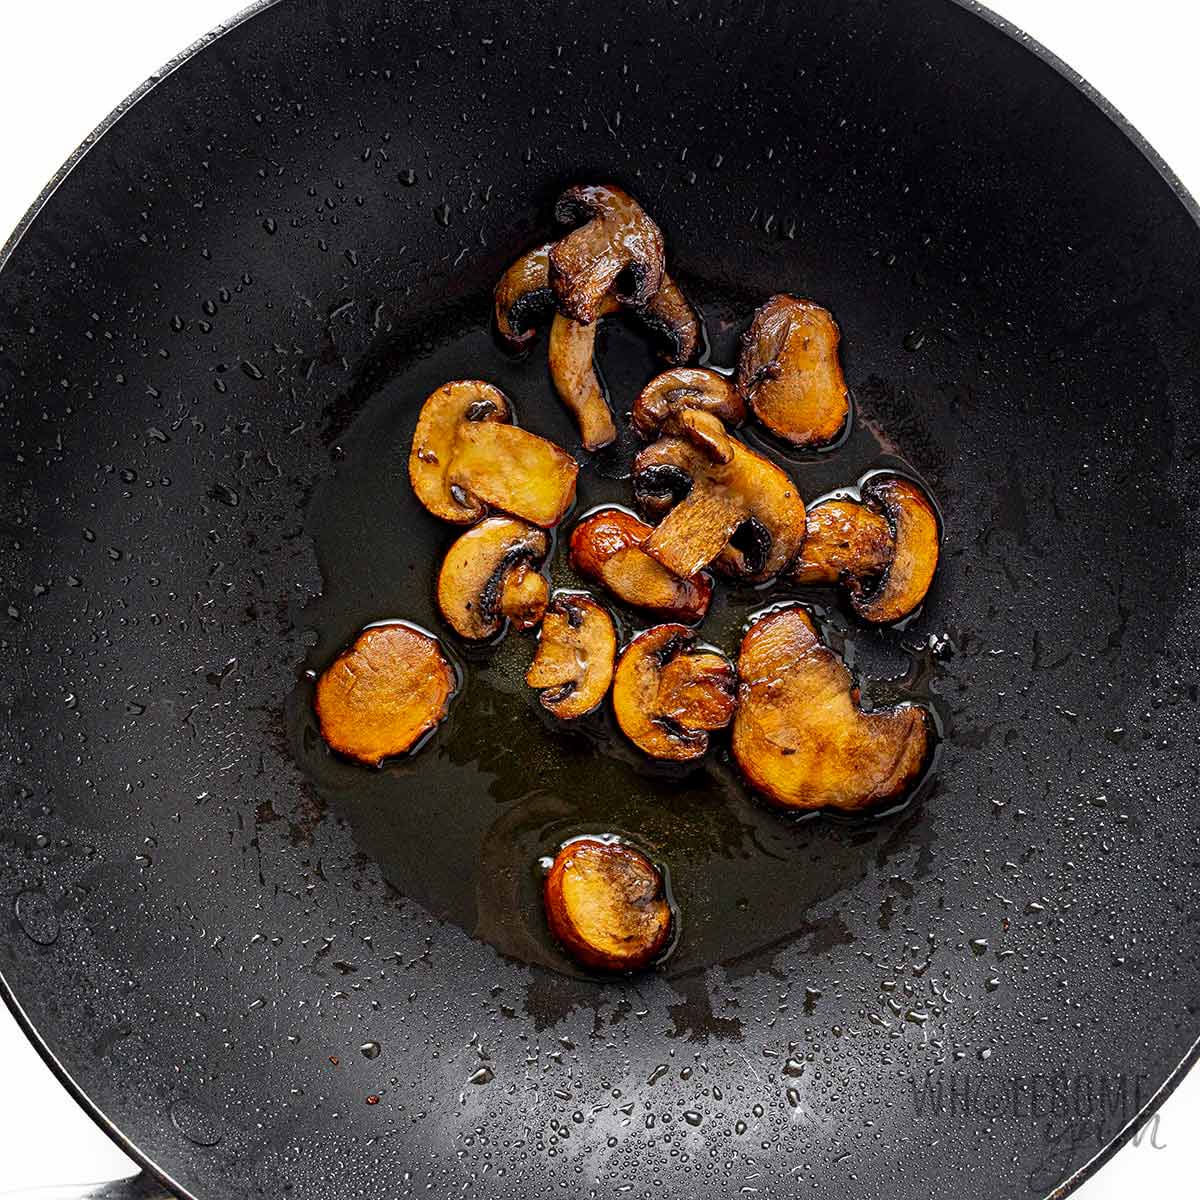 Mushrooms being cooked in a wok.